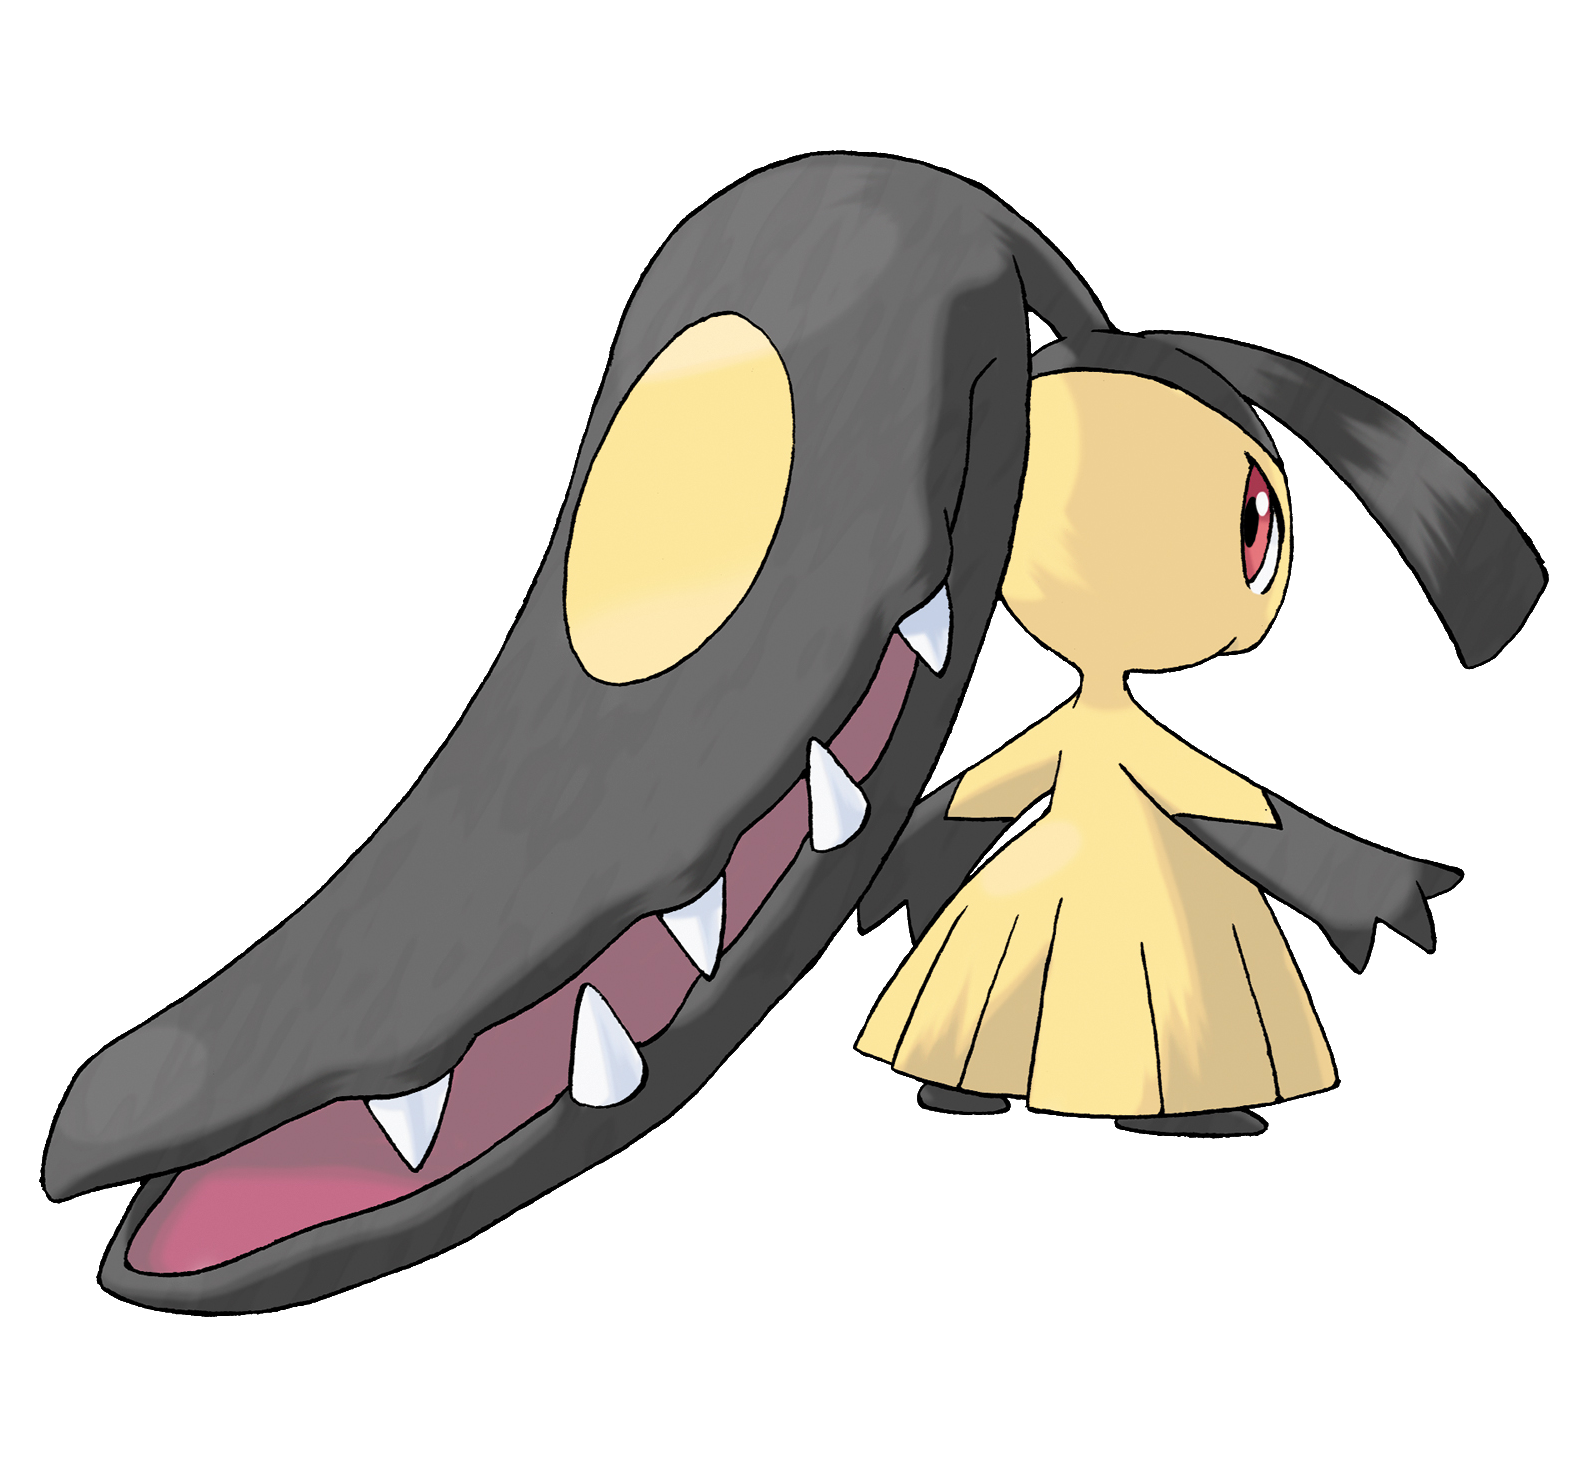 http://img3.wikia.nocookie.net/__cb20080715105254/es.pokemon/images/b/bd/Mawile.png